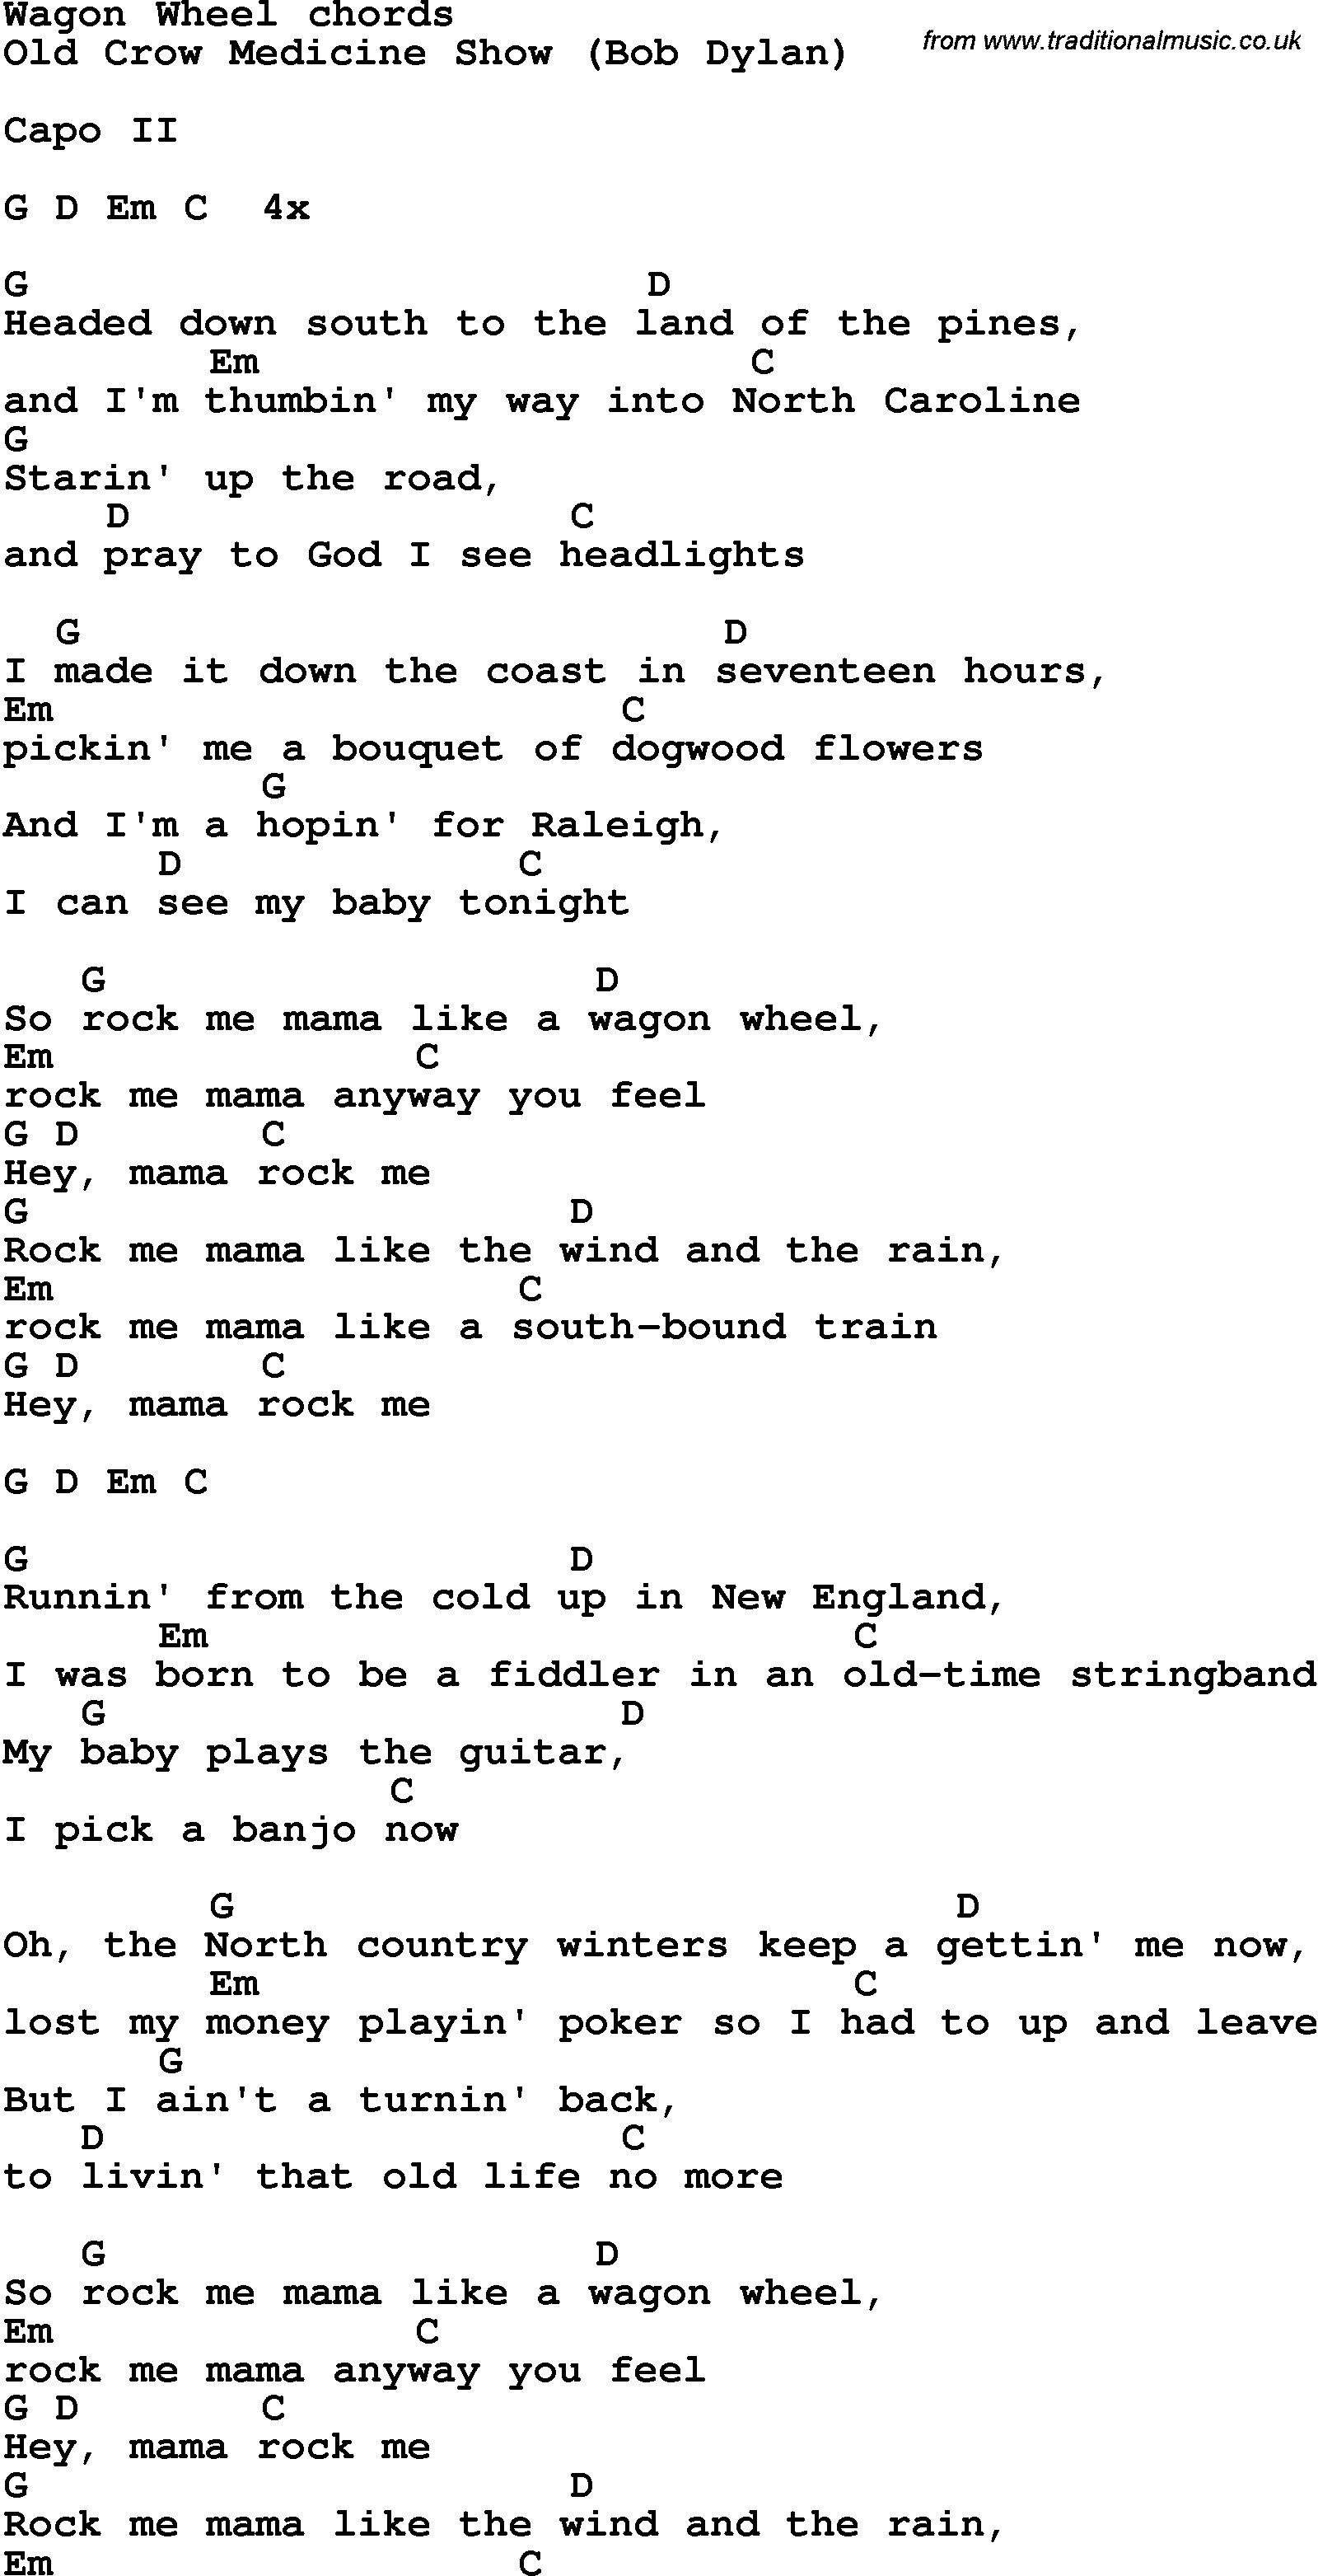 Song Lyrics with guitar chords for Wagon Wheel